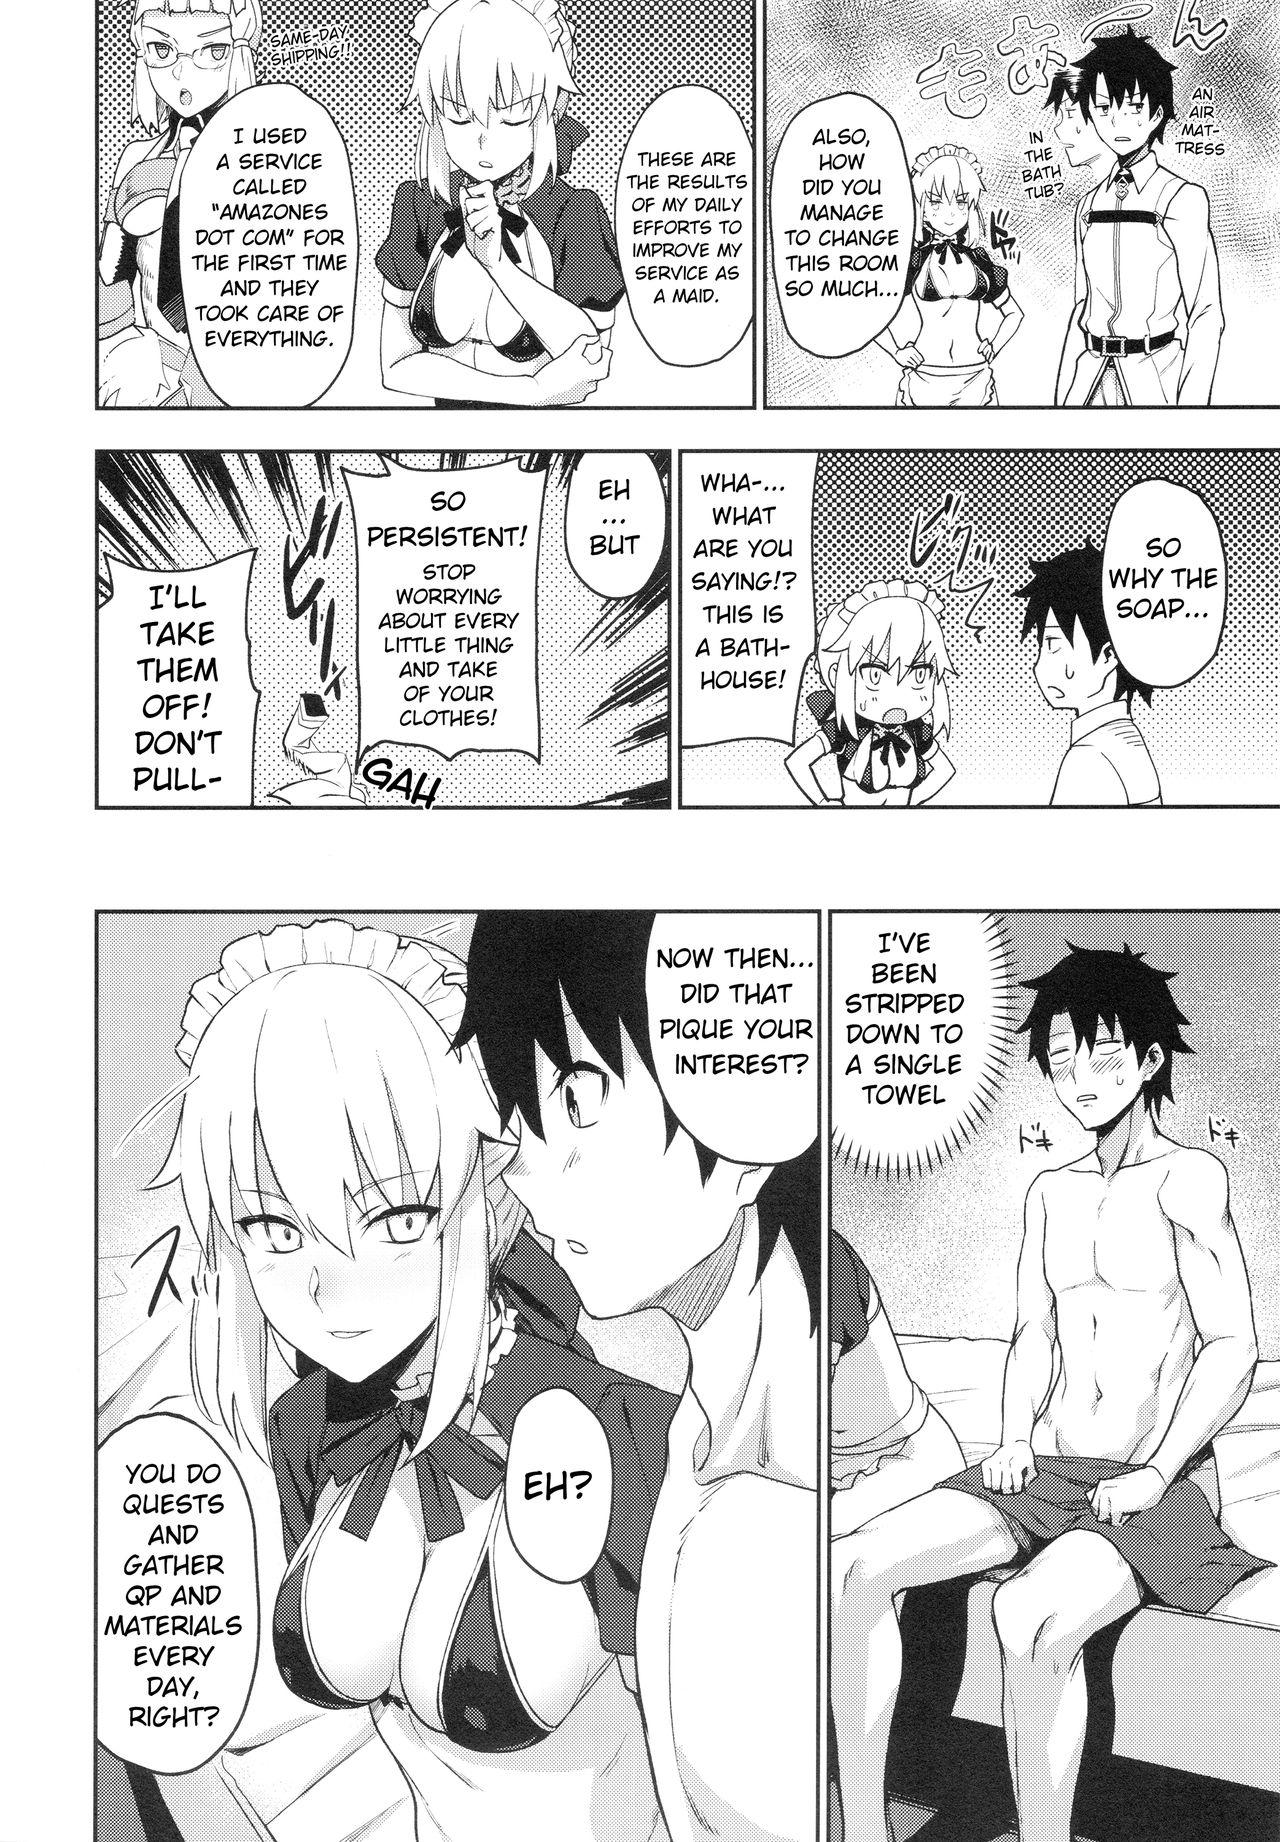 Pounding Chaldea Soap SSS-kyuu Gohoushi Maid - Fate grand order Huge Boobs - Page 4